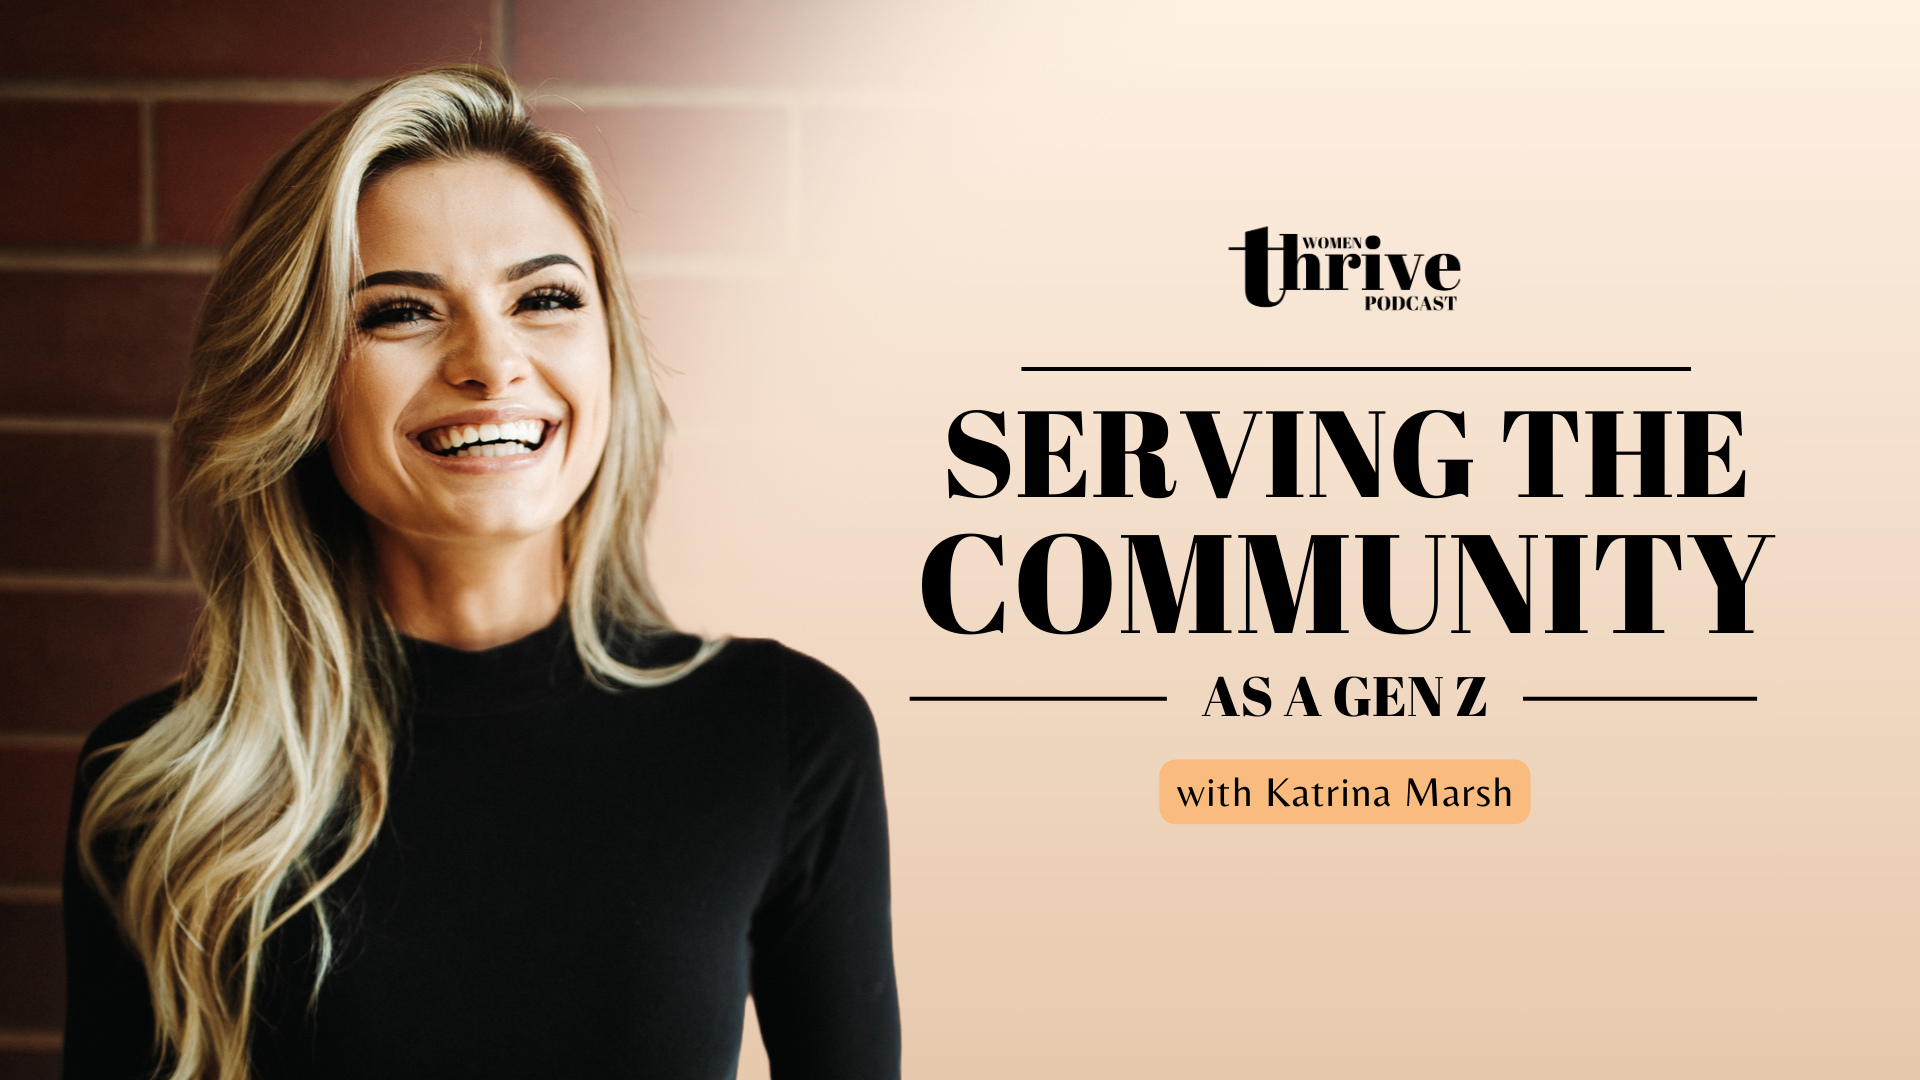 Serving the Community as a Gen Z with Katrina Marsh